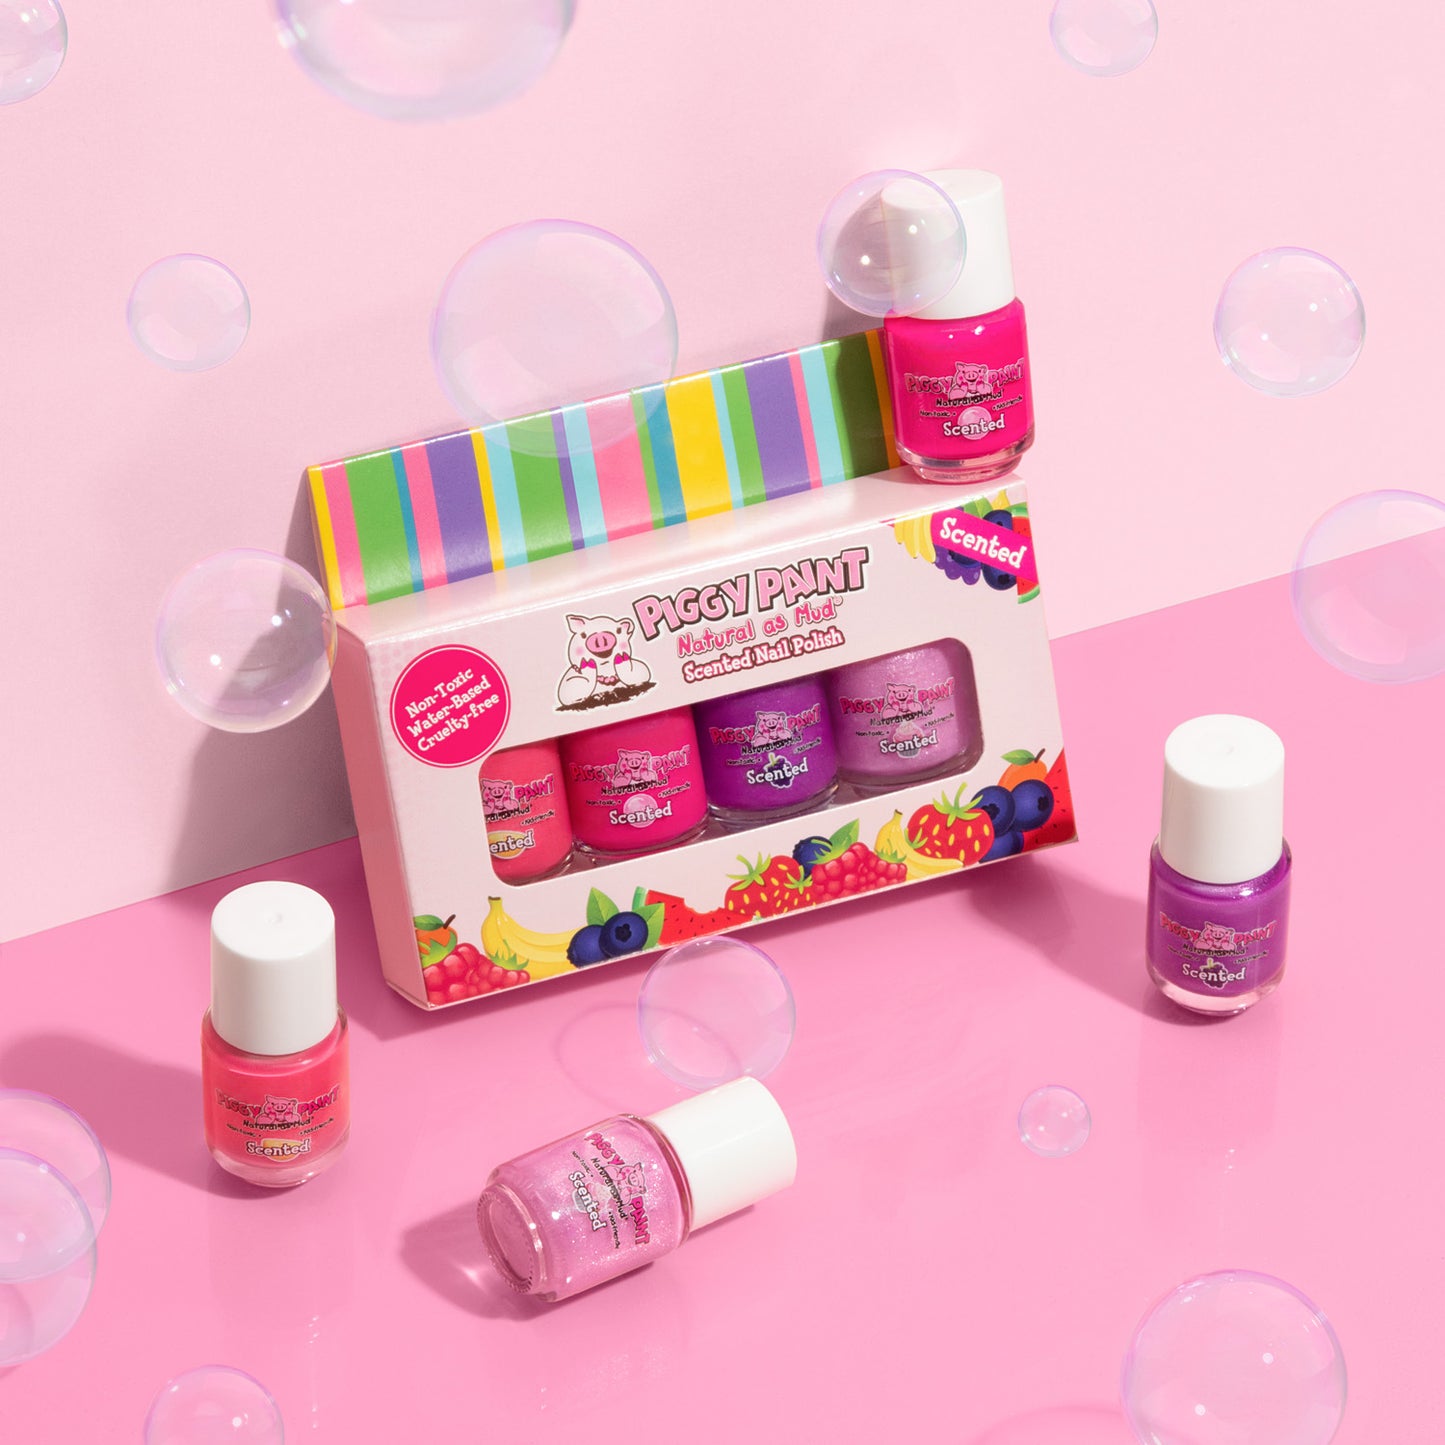 Scented Lucky Lollipop 4 Polish - Gift Set